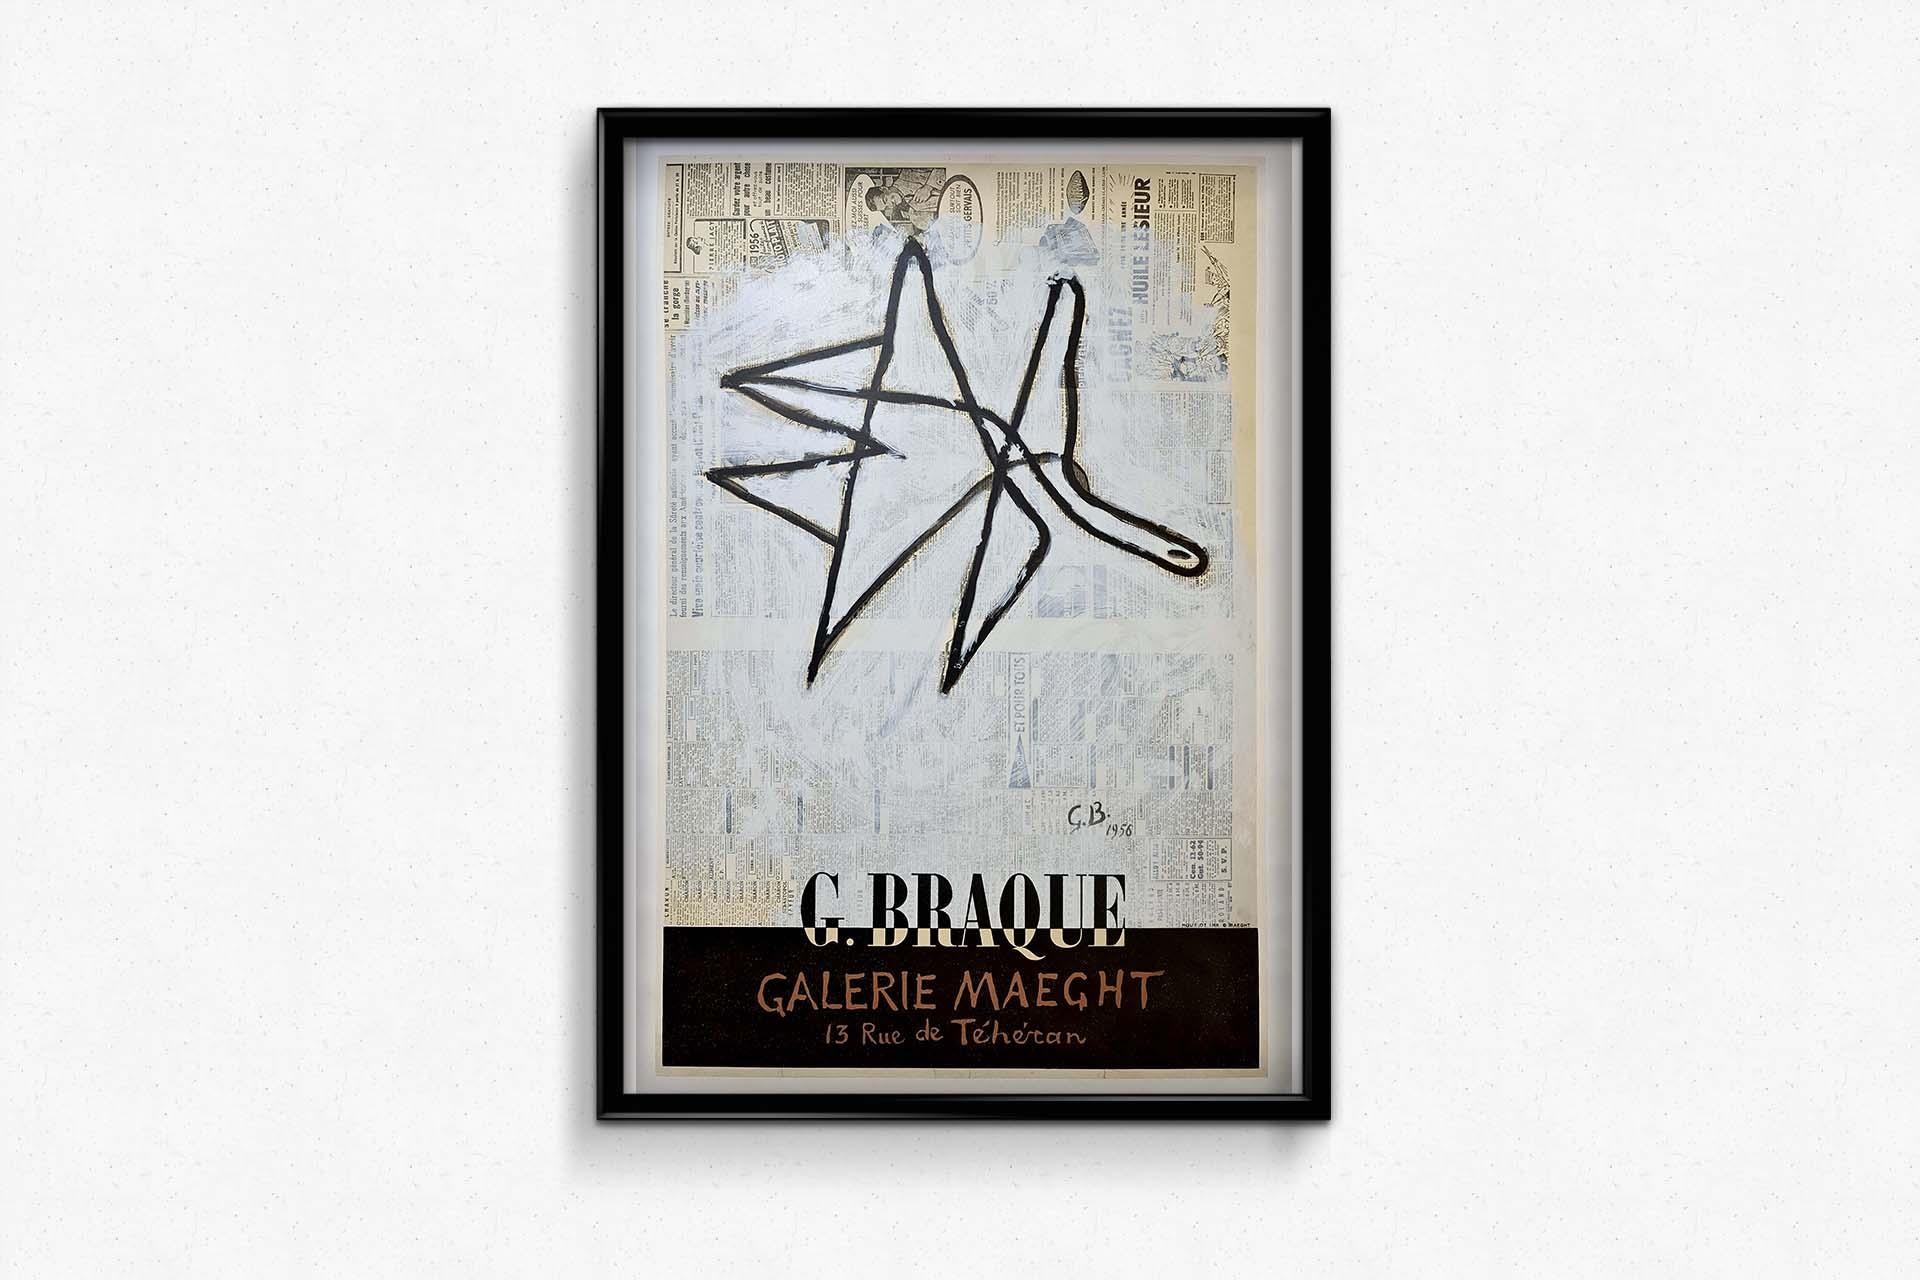 Exhibition of Georges Braque at the Galerie Maeght in 1956 Original Poster 3